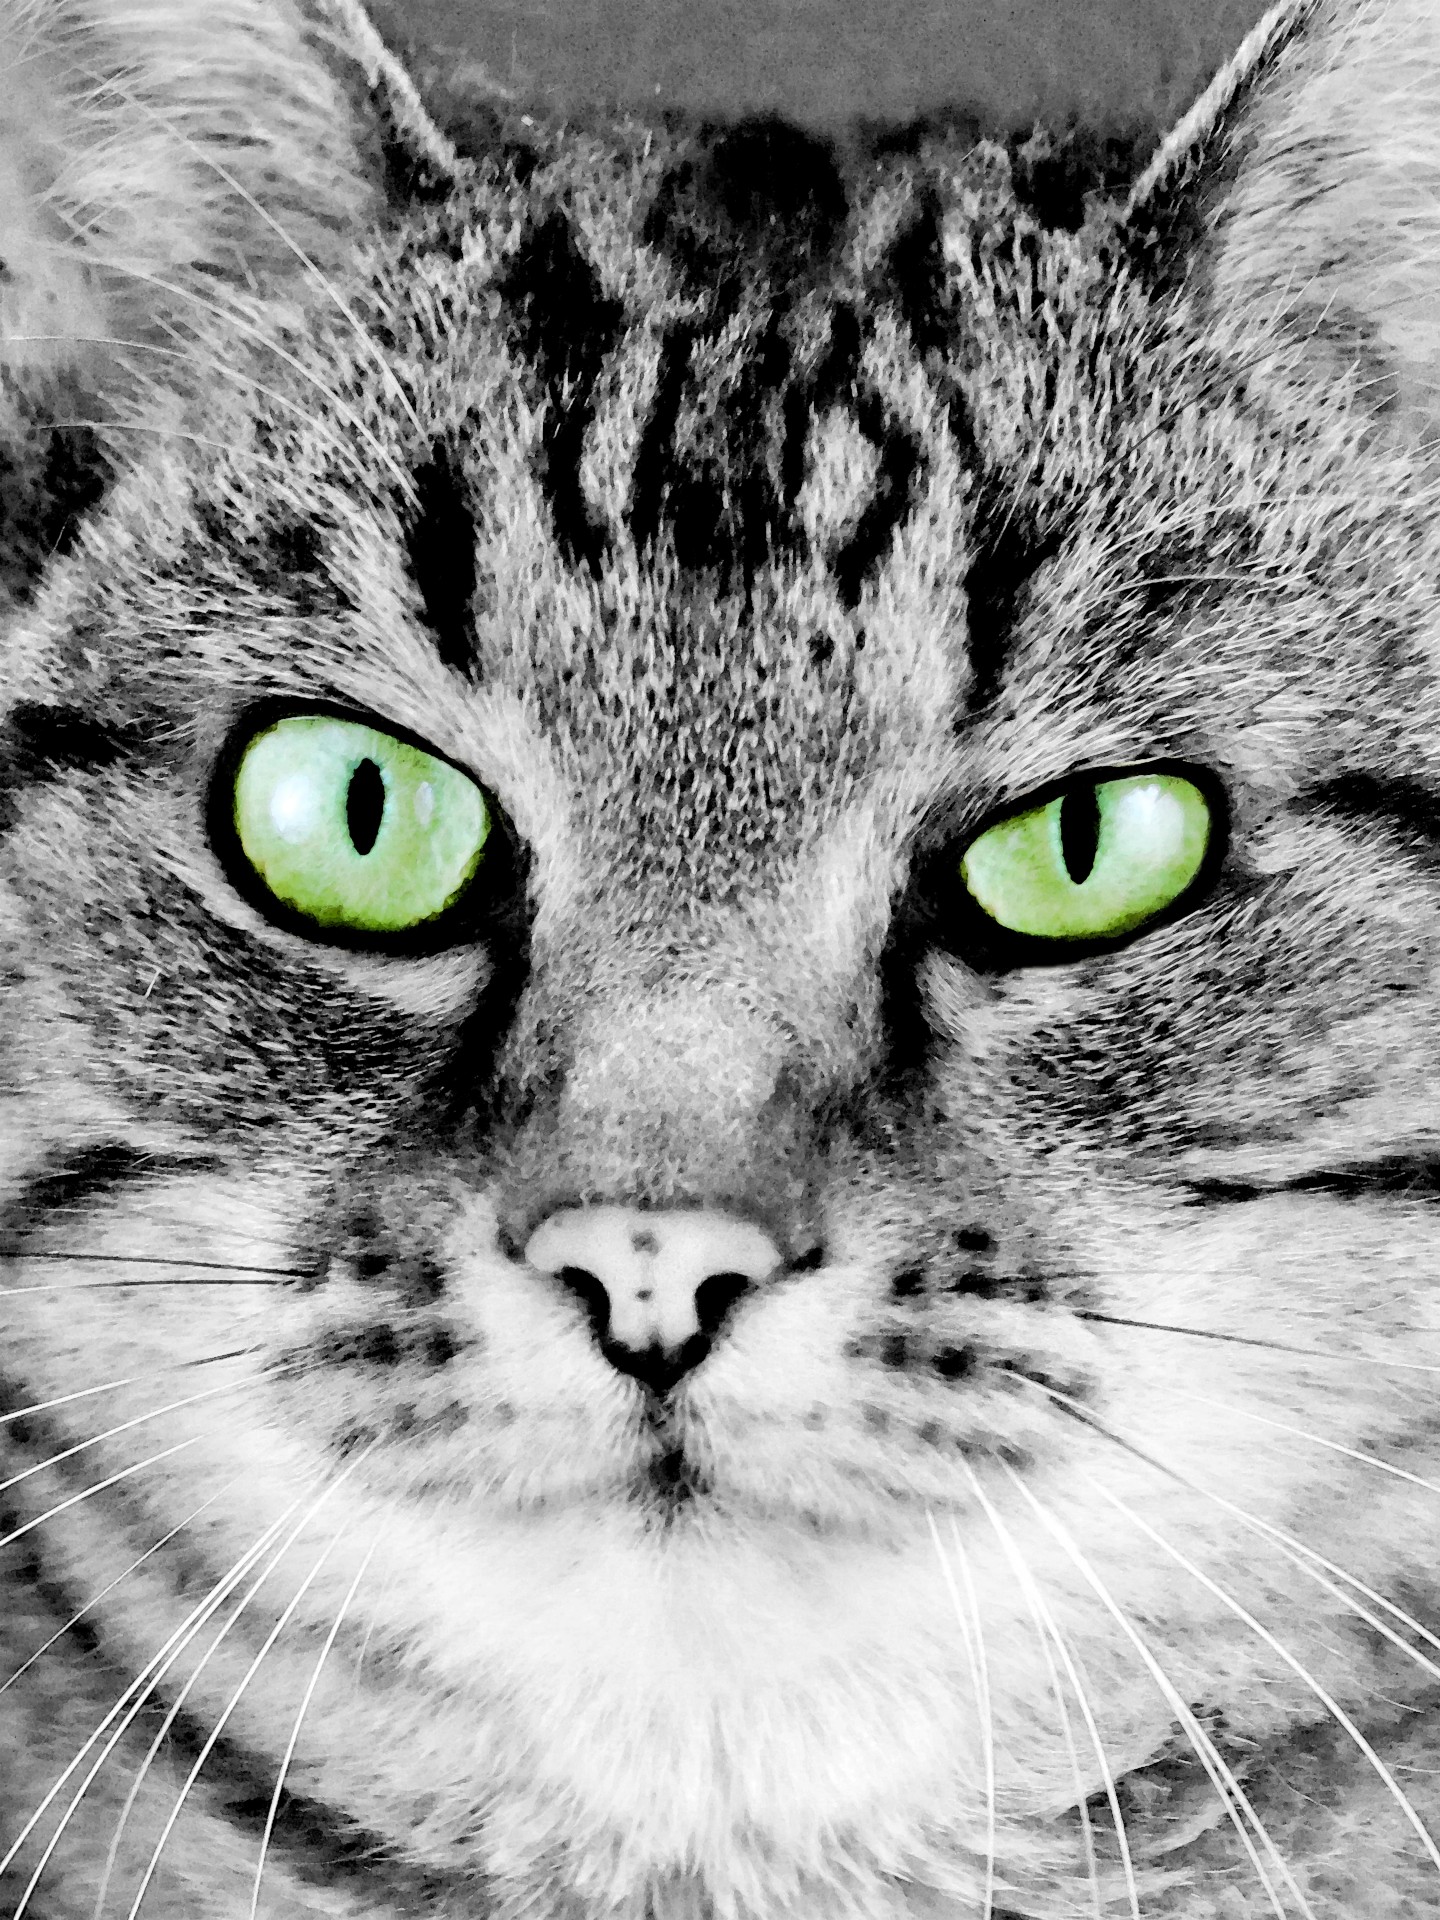 Artistic illustration of cat's face close up in black and white, with green eyes